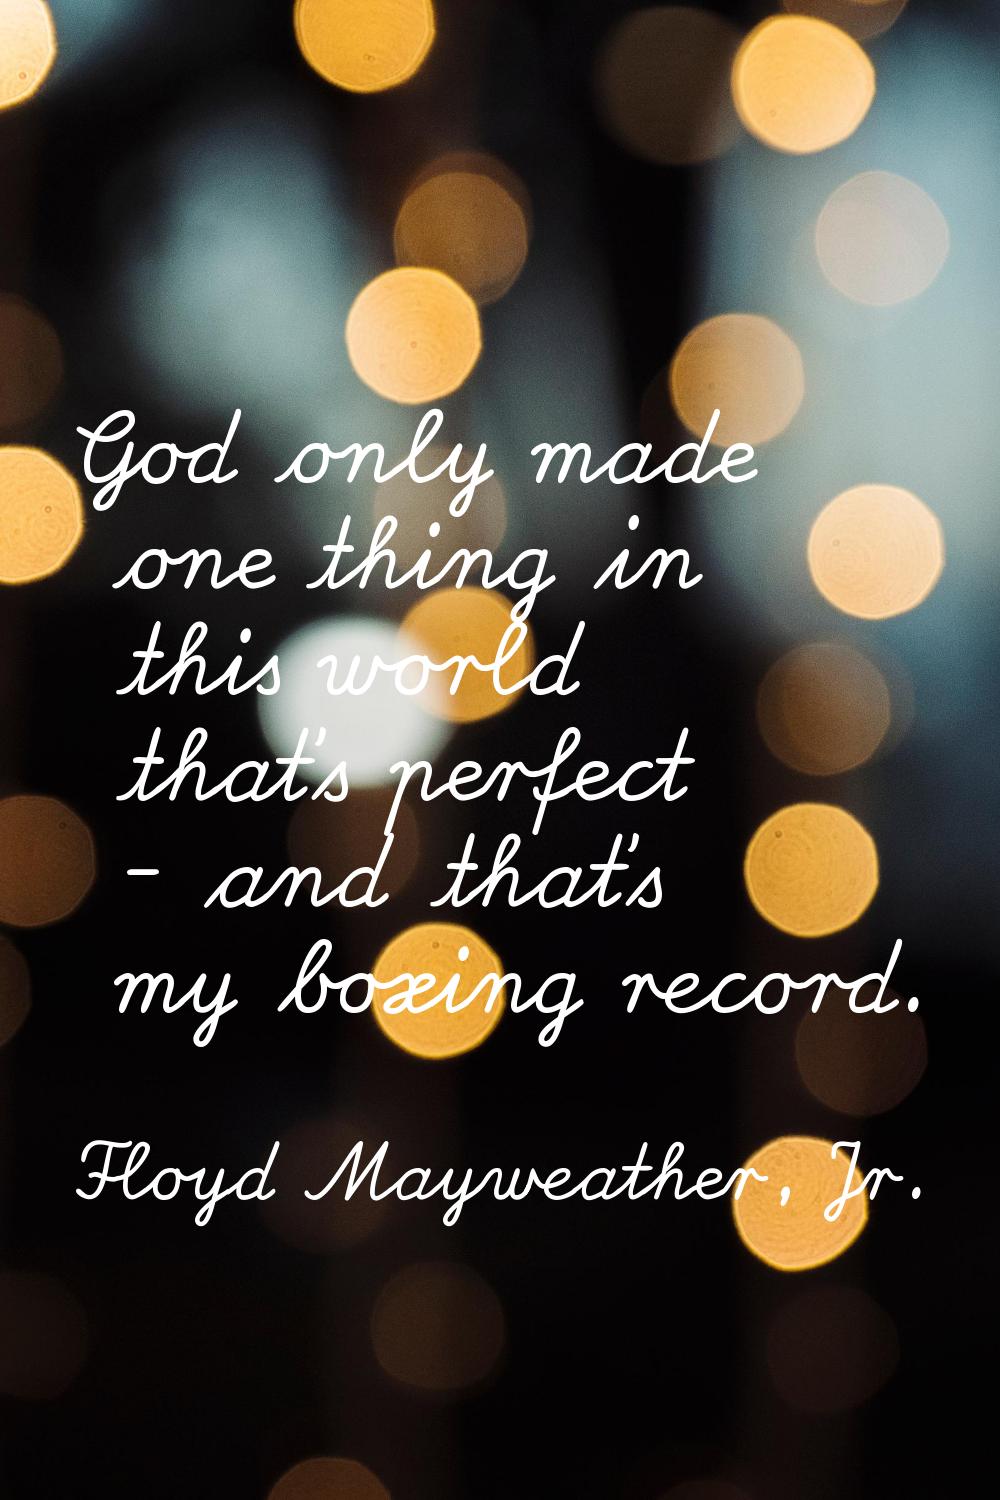 God only made one thing in this world that's perfect - and that's my boxing record.